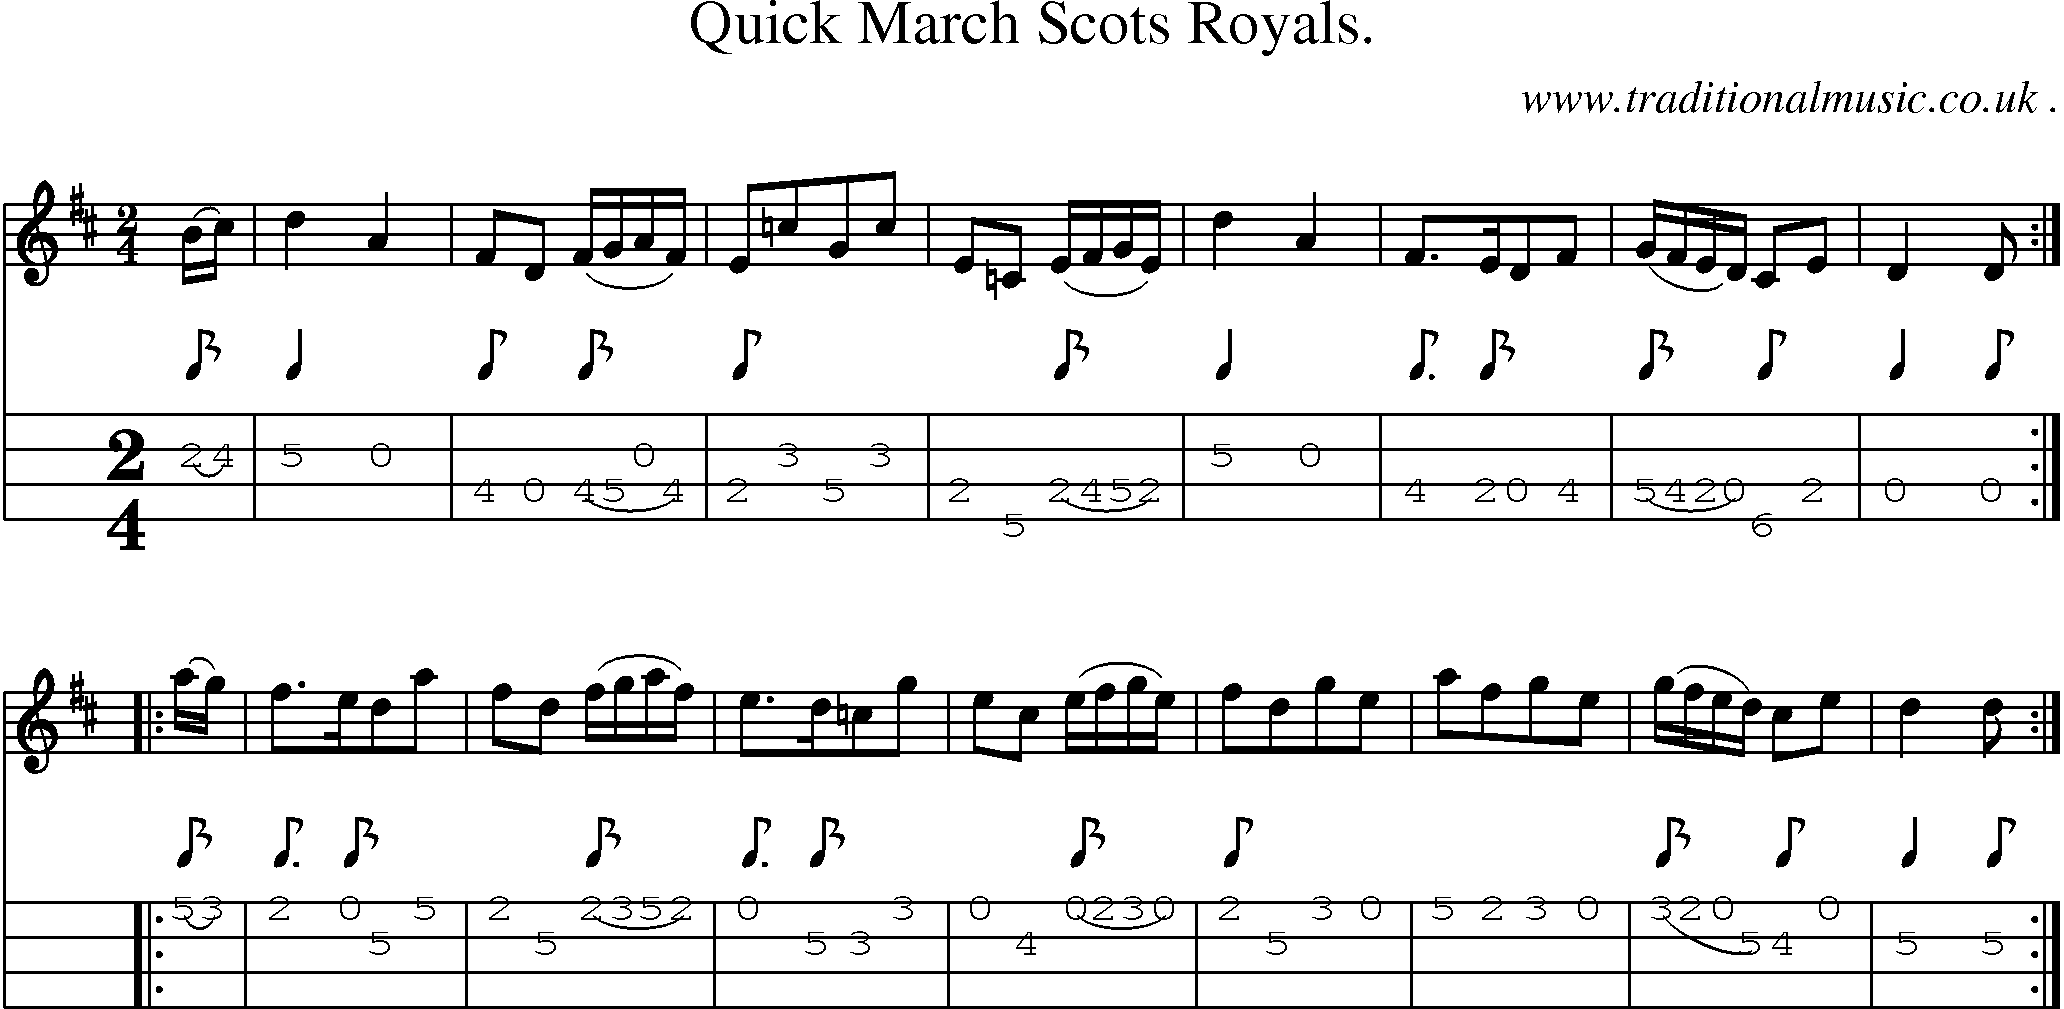 Sheet-music  score, Chords and Mandolin Tabs for Quick March Scots Royals